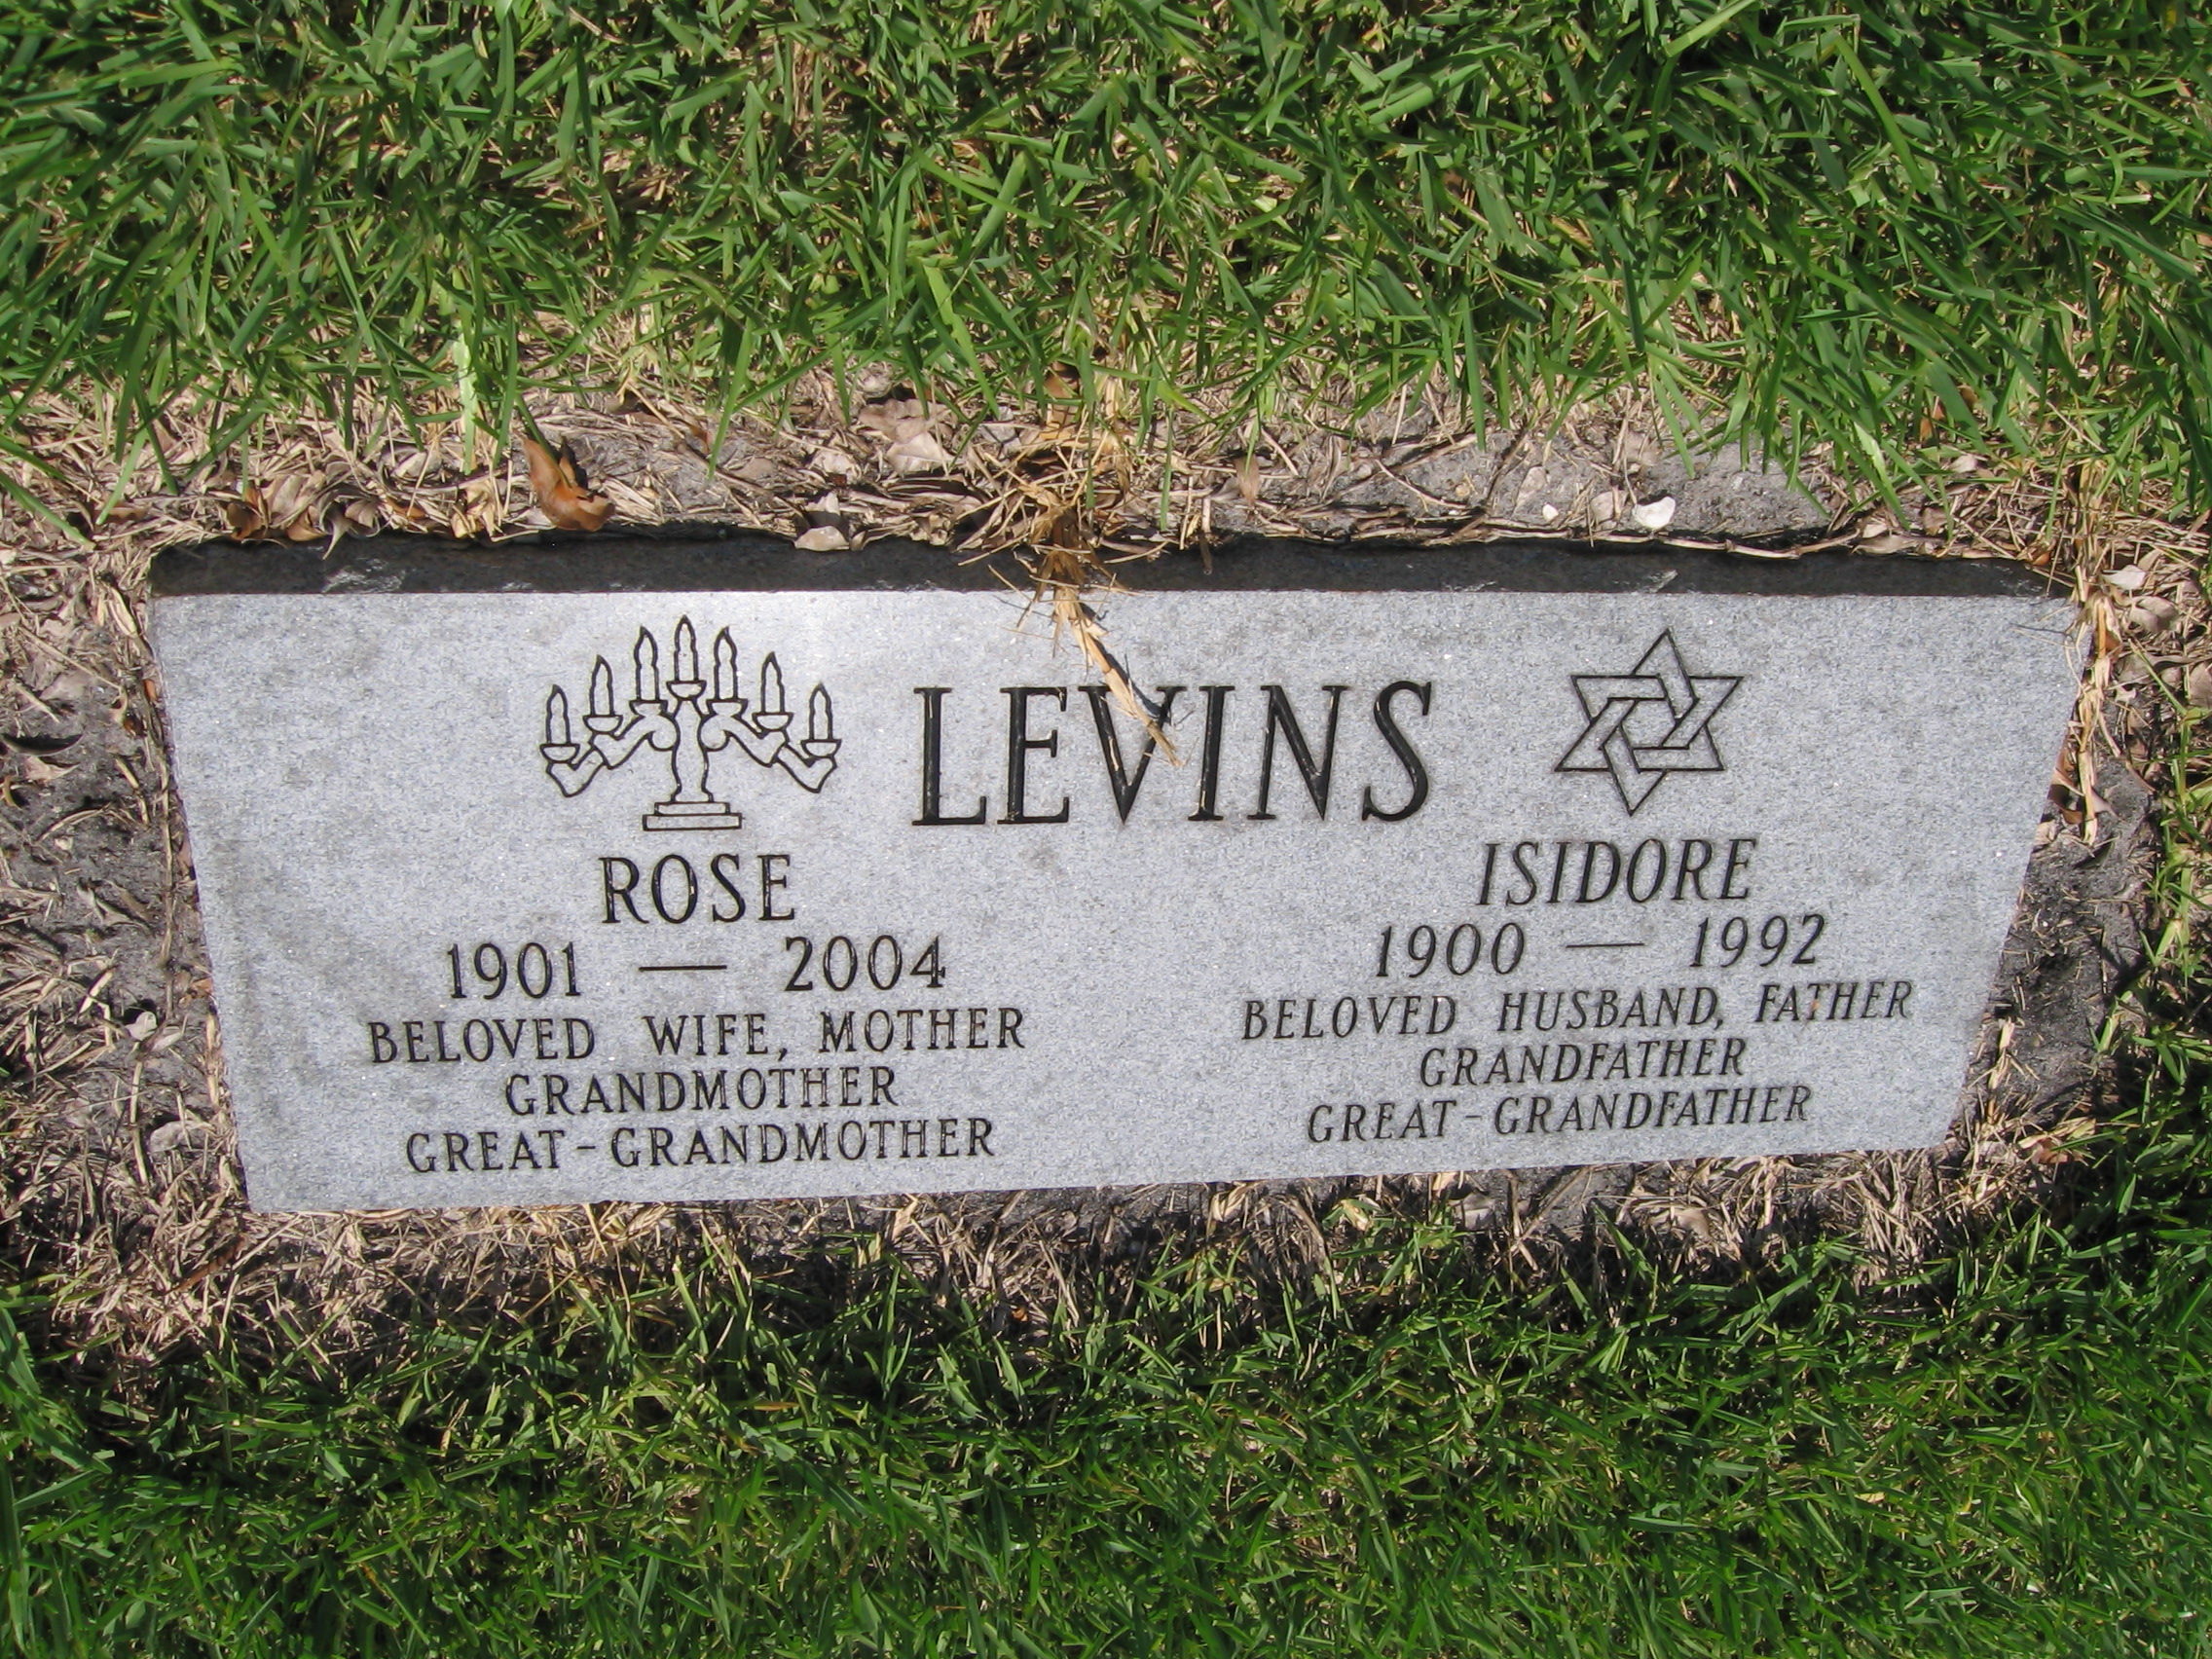 Isidore Levins